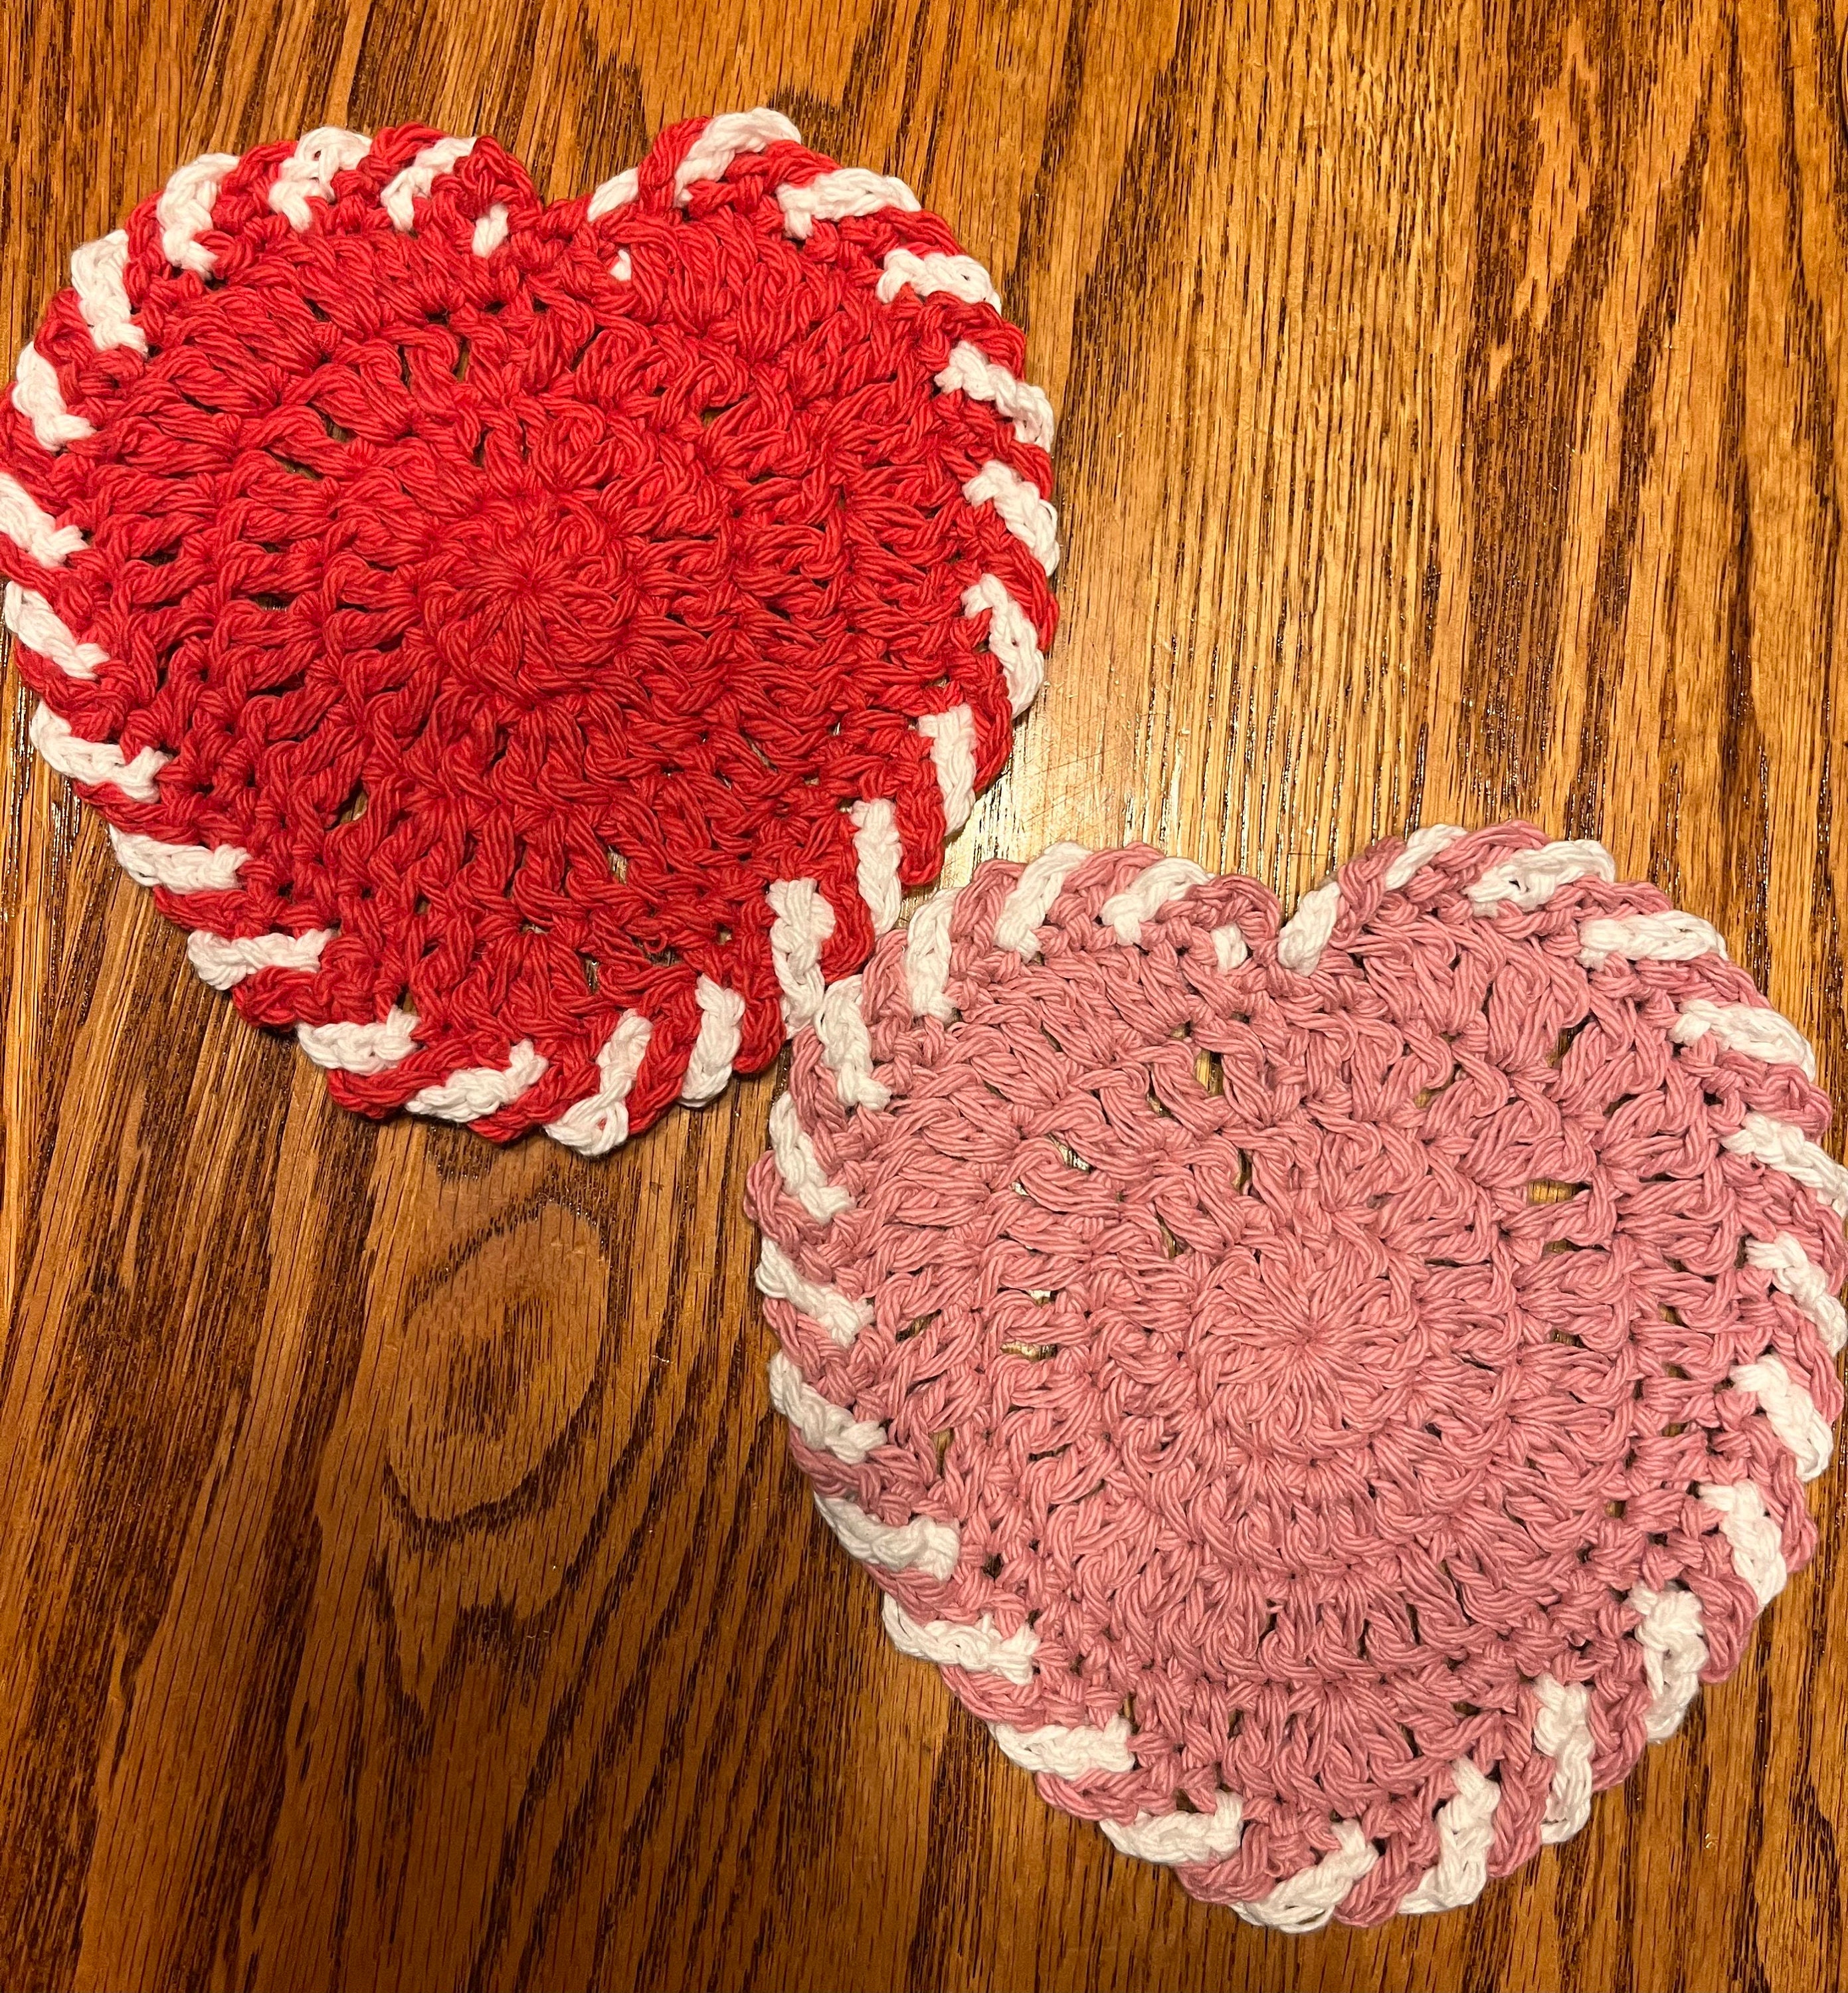 Valentine’s Day coasters set of two